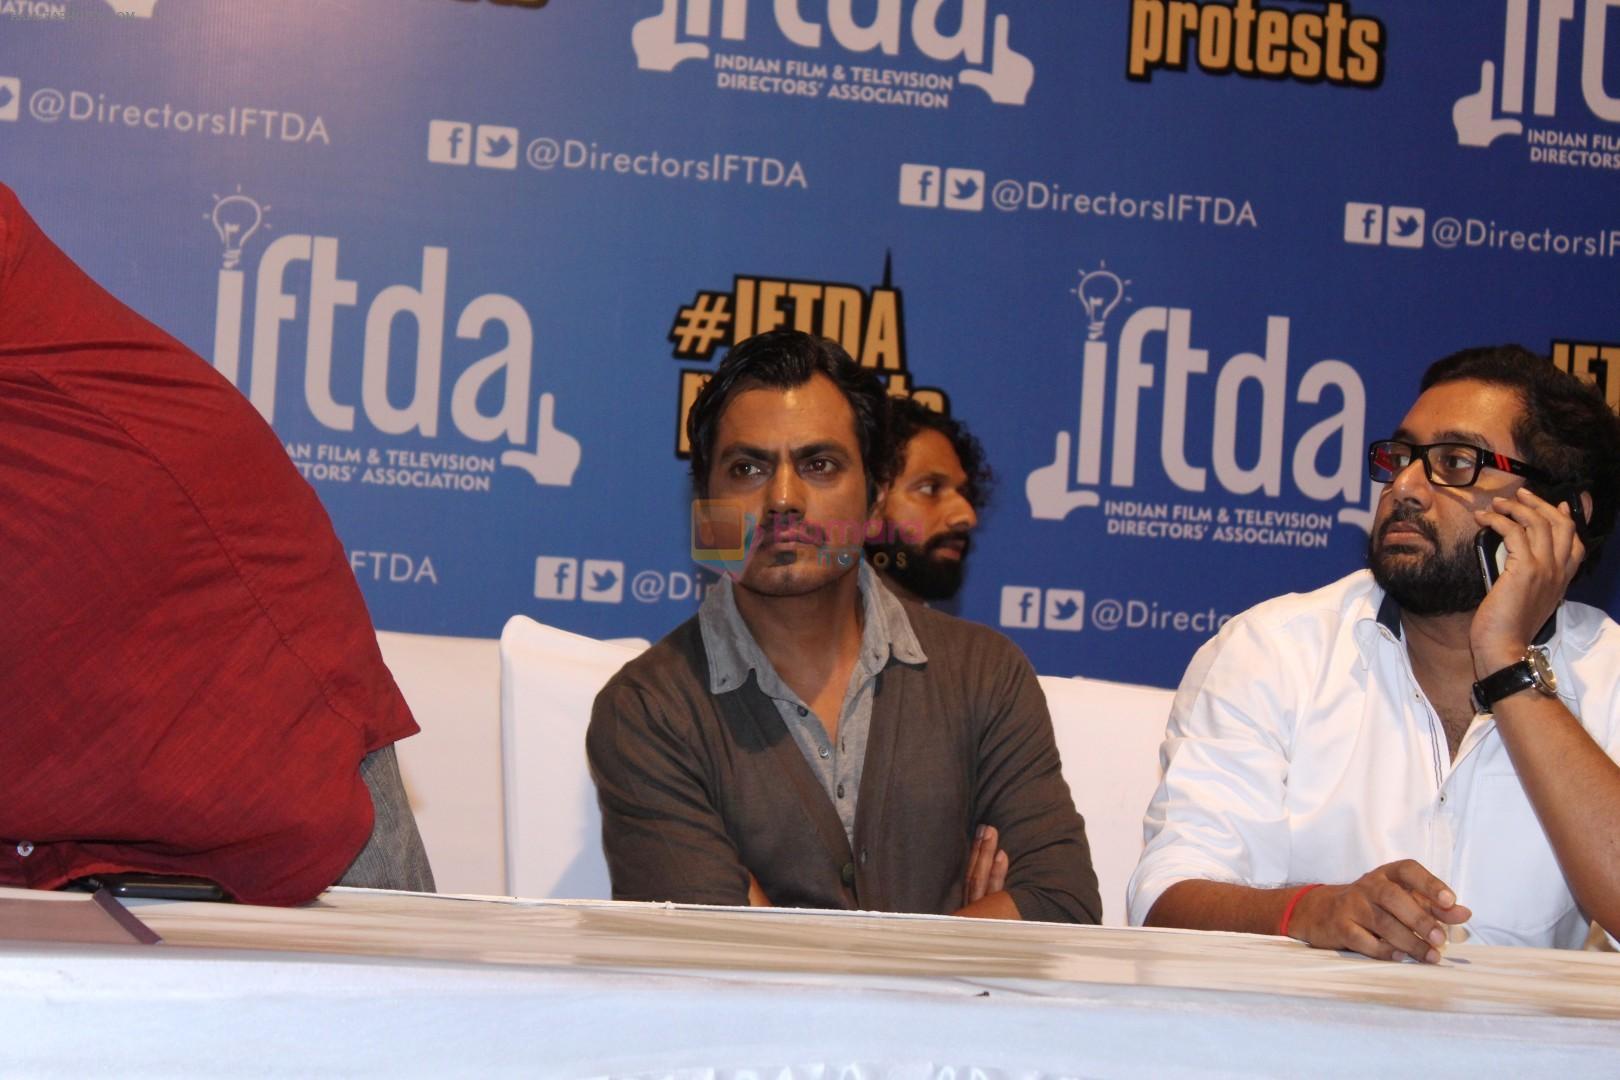 Nawazuddin Siddiqui At The Press Conference Along With Iftda (Indian Films & Tv Directors Association) on 2nd Aug 2017